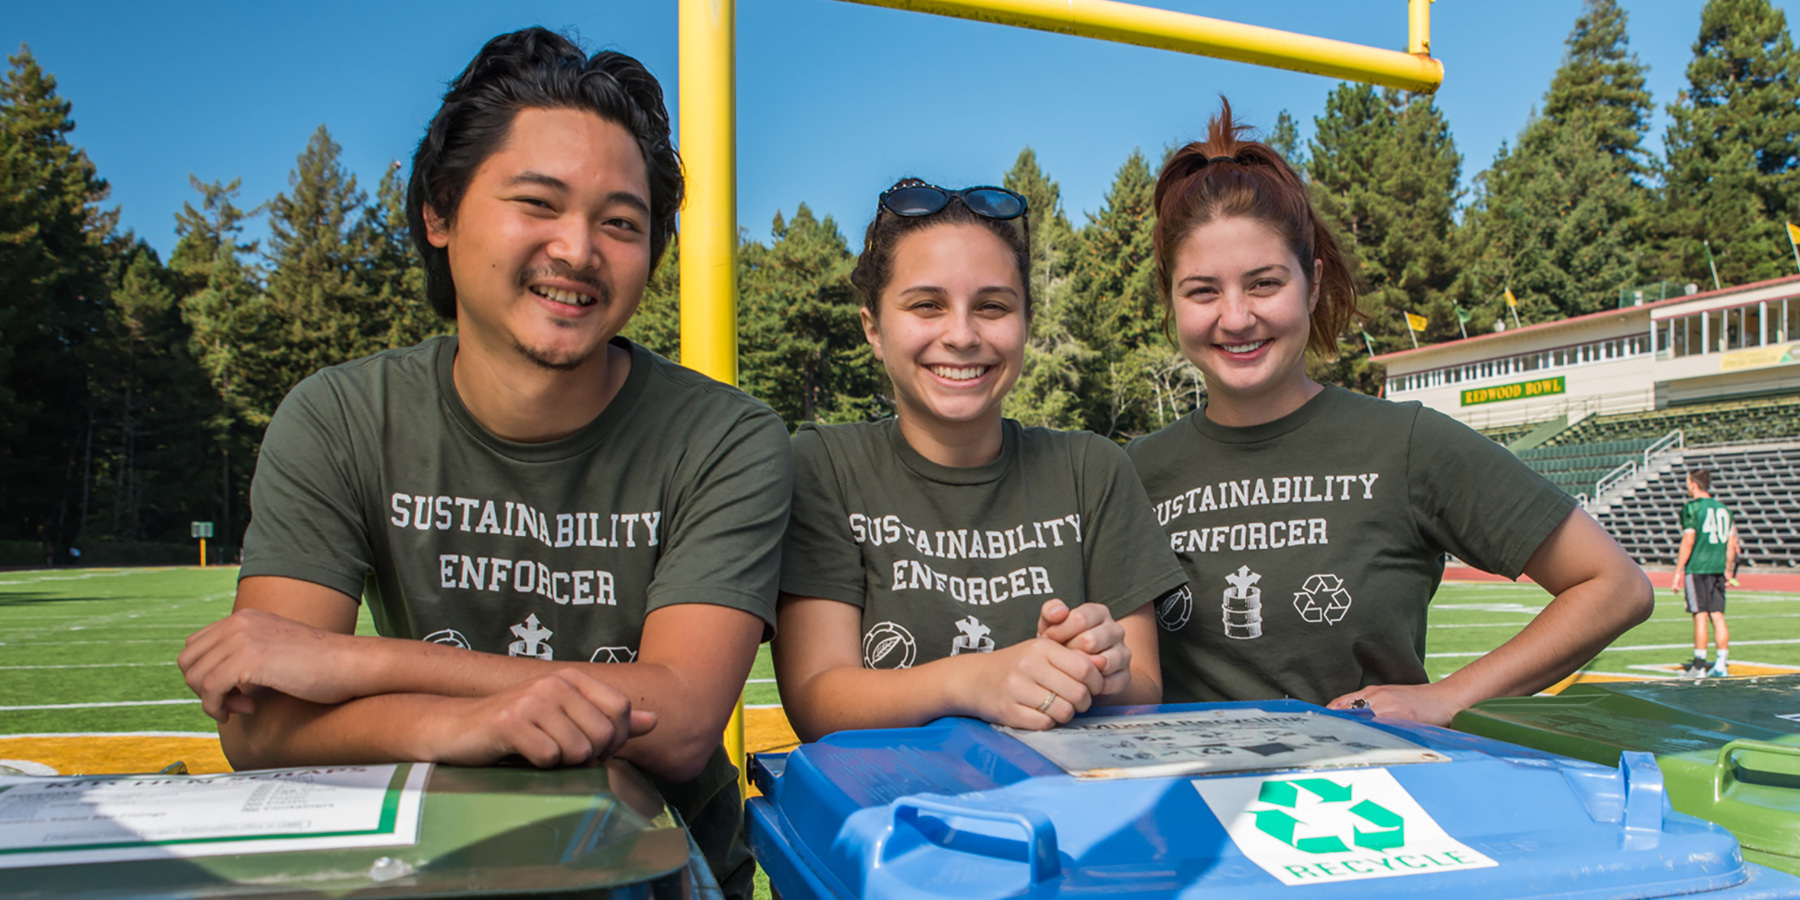 Students stand by recycling bins.